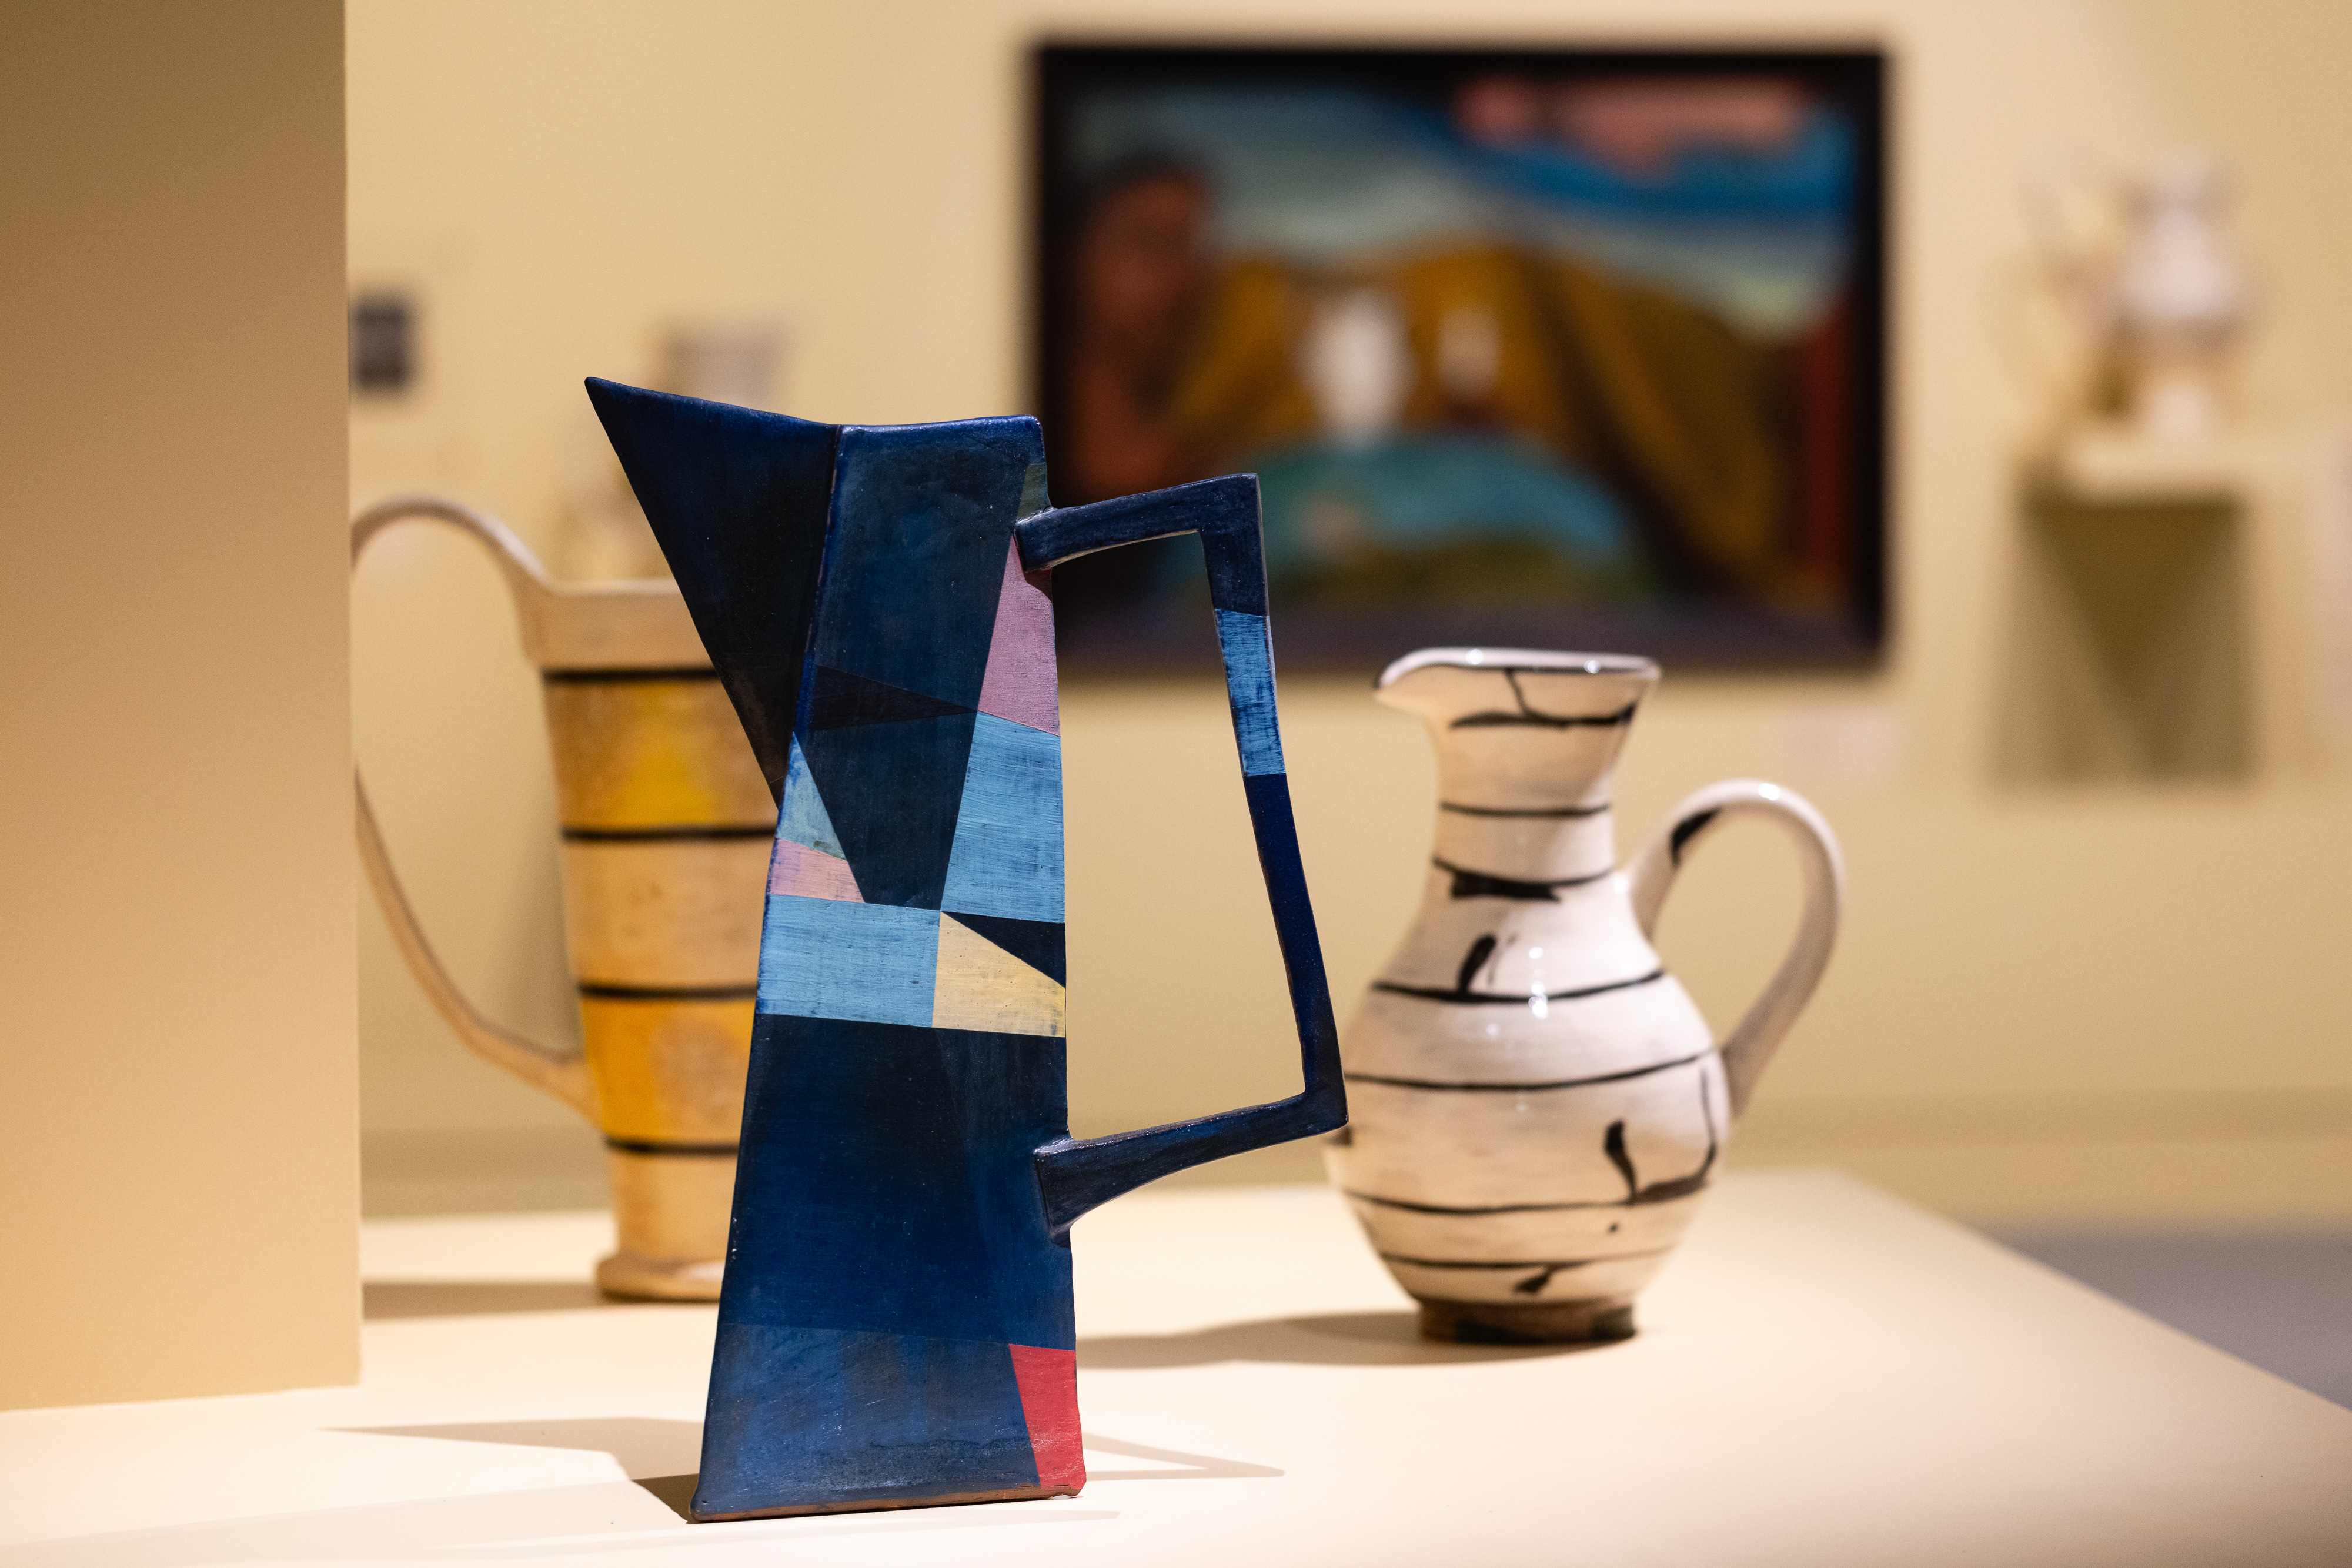 An installation shot of Paul Maseyk's jugs with the paintings they are responding to. This image features a three jugs in the foreground made by Paul Maseyk, with a large Colin McCahon painting in the background.